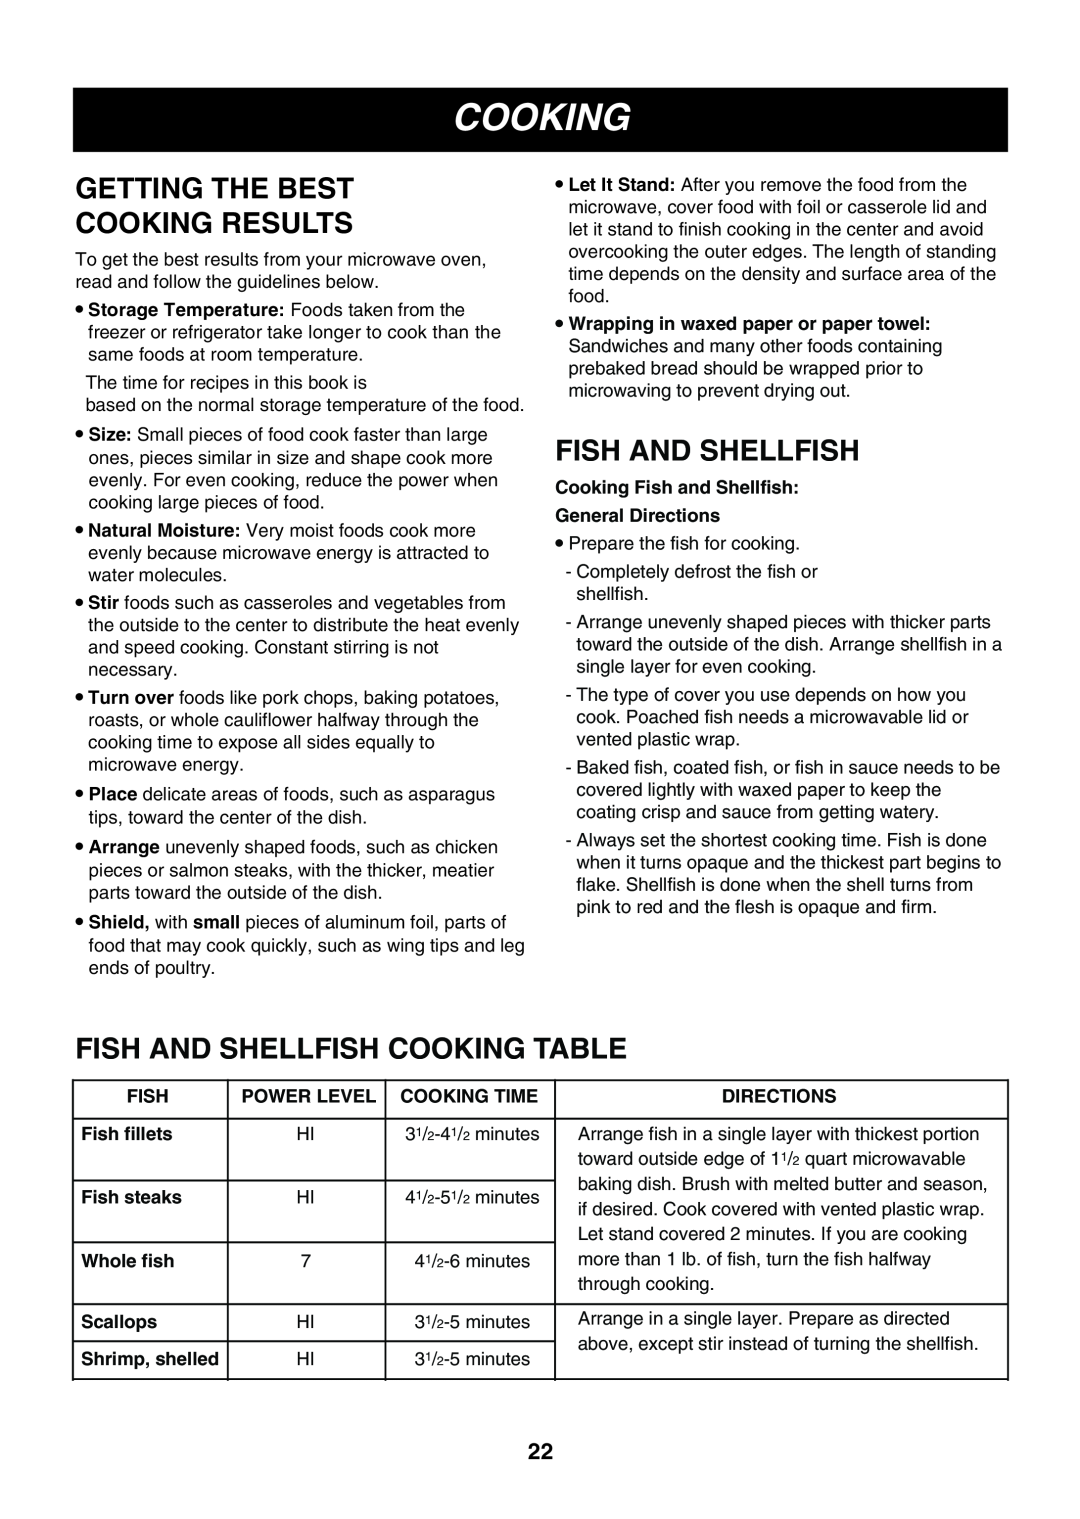 LG Electronics LMVM2055SB owner manual Getting The Best Cooking Results, Fish And Shellfish Cooking Table 